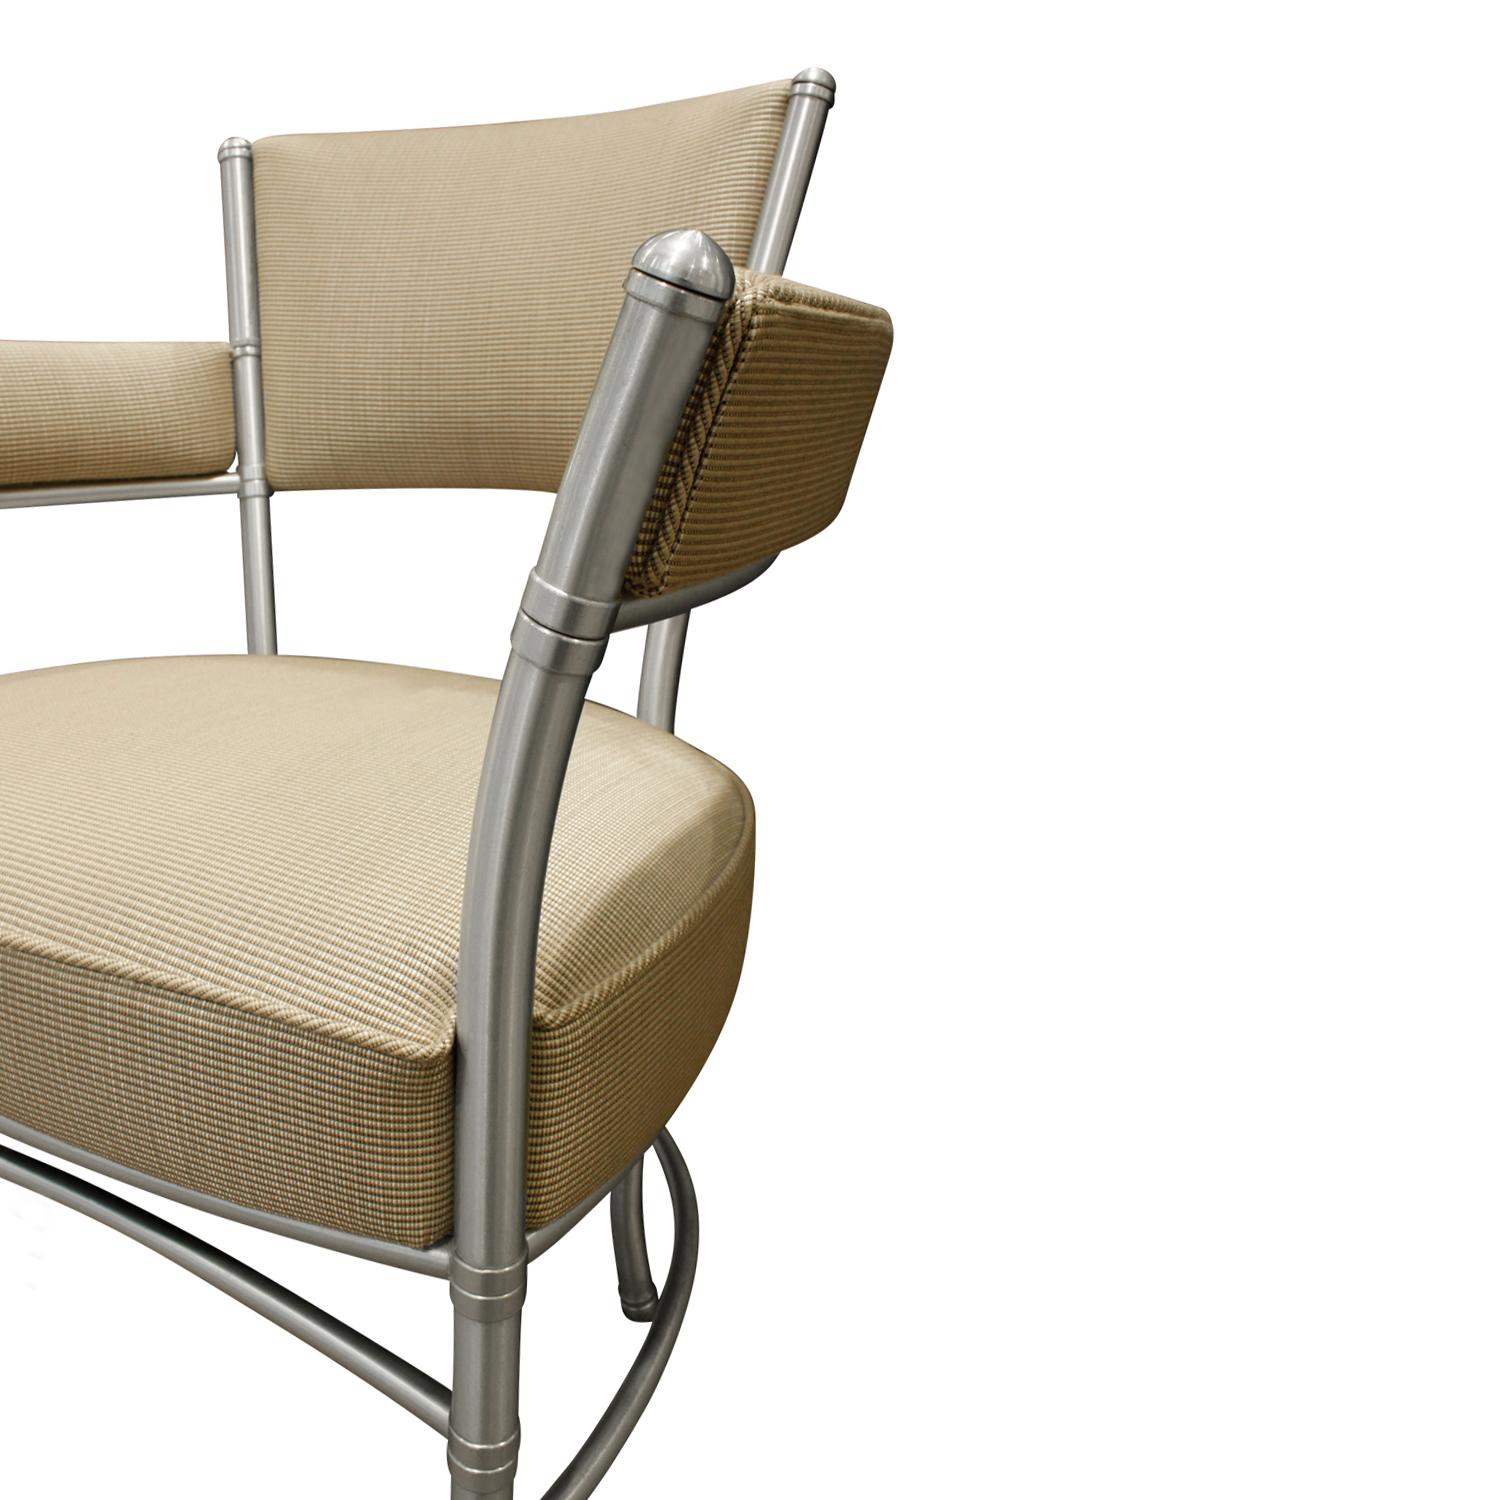 Hand-Crafted Warren McArthur Pair of Lounge Chairs in Tubular Aluminum, 1930s 'Signed'